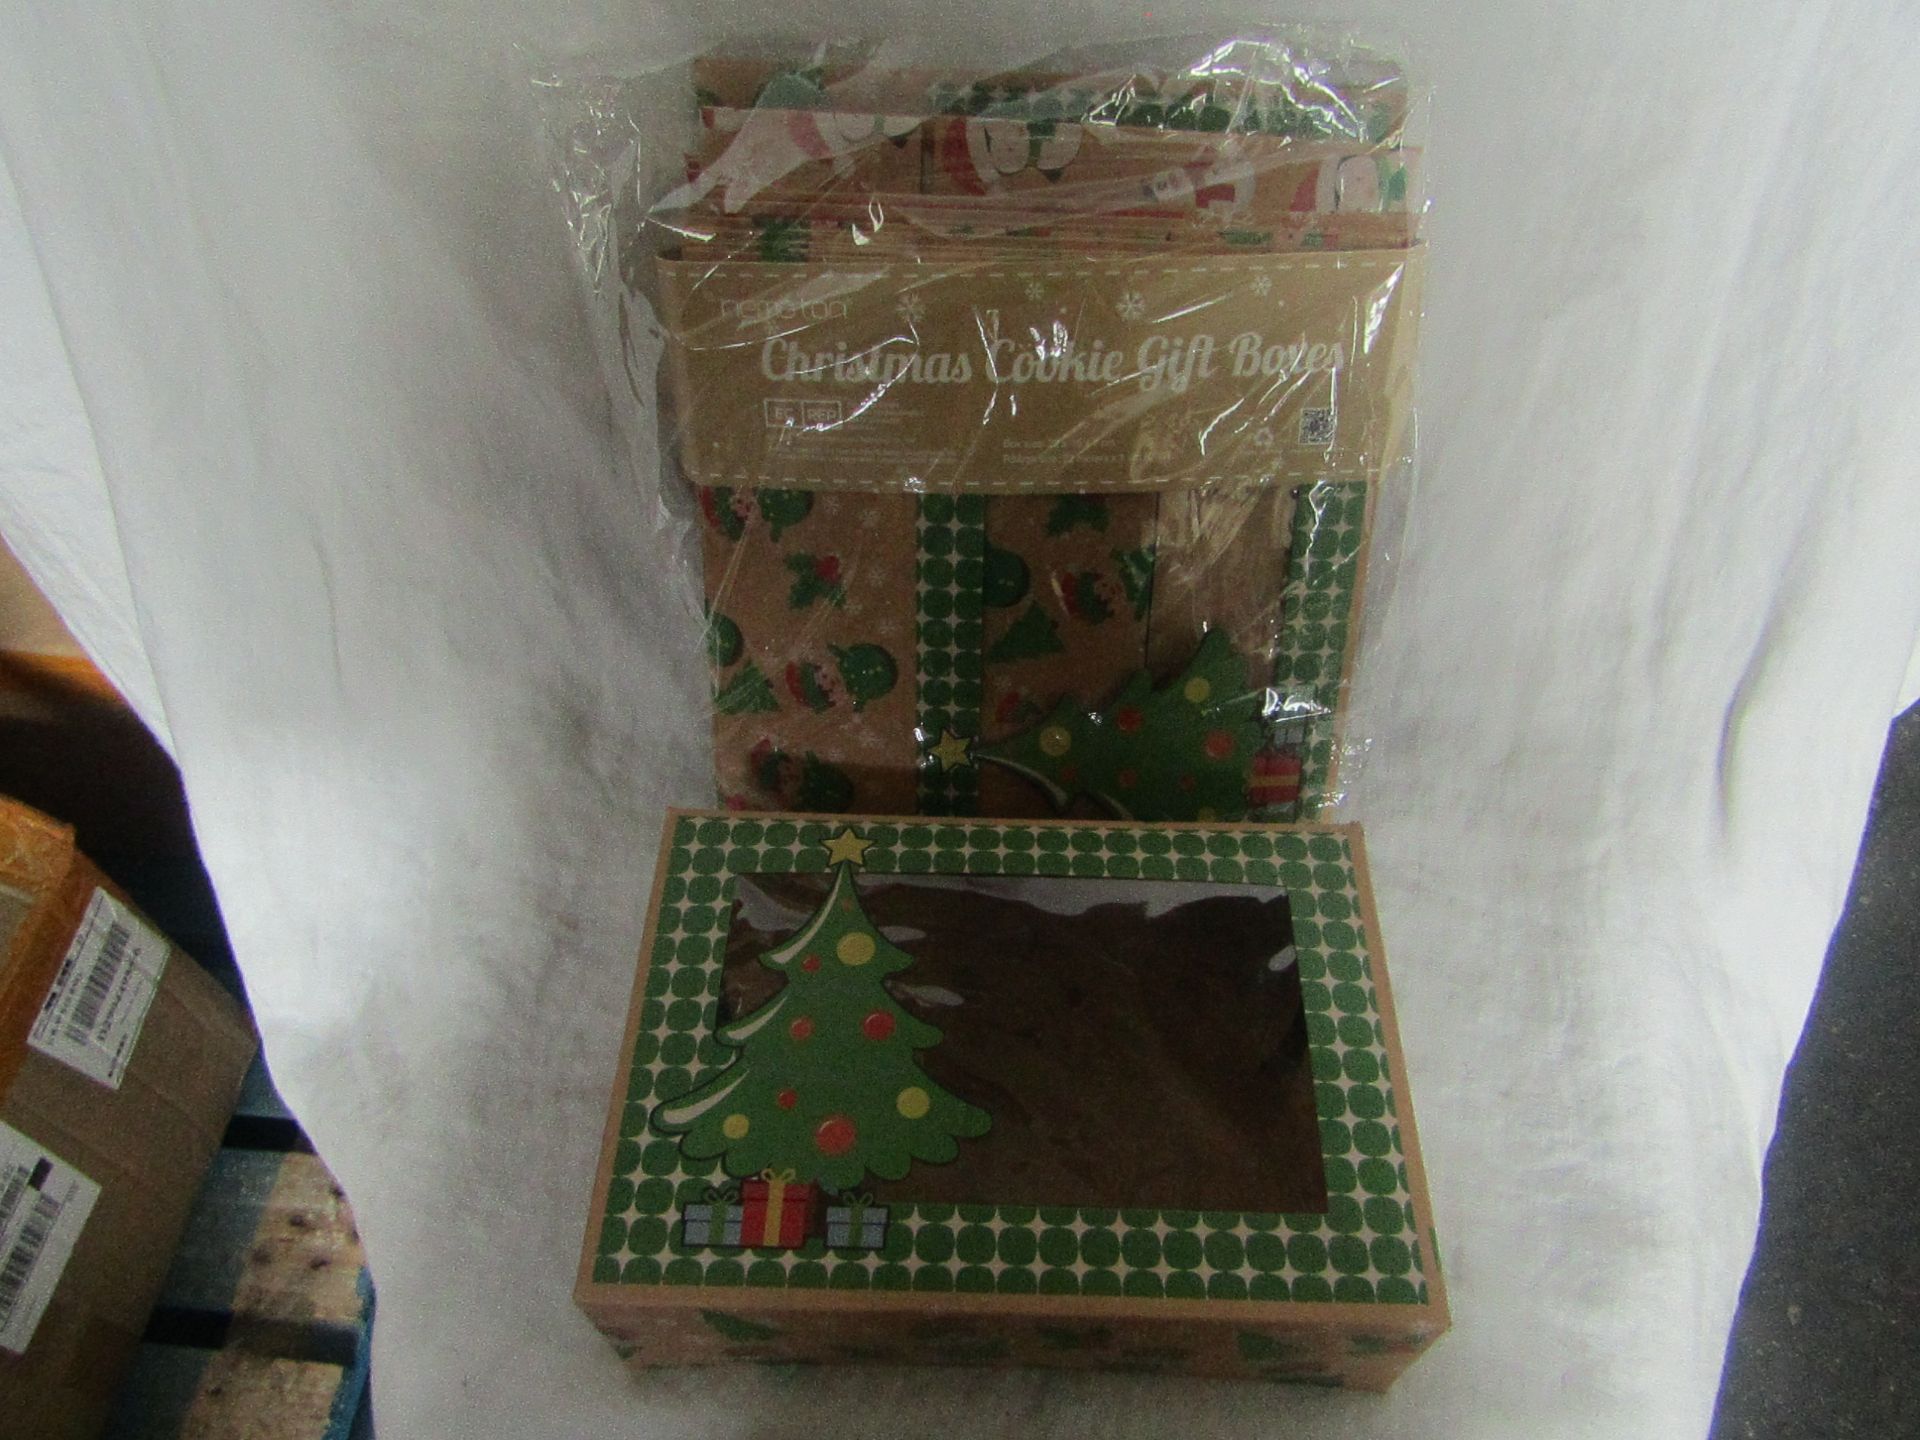 5x Hemoton - Christmas Cookie Boxes With Roll of Ribbon ( 12-Pieces Per Pack ) - New & Packaged.